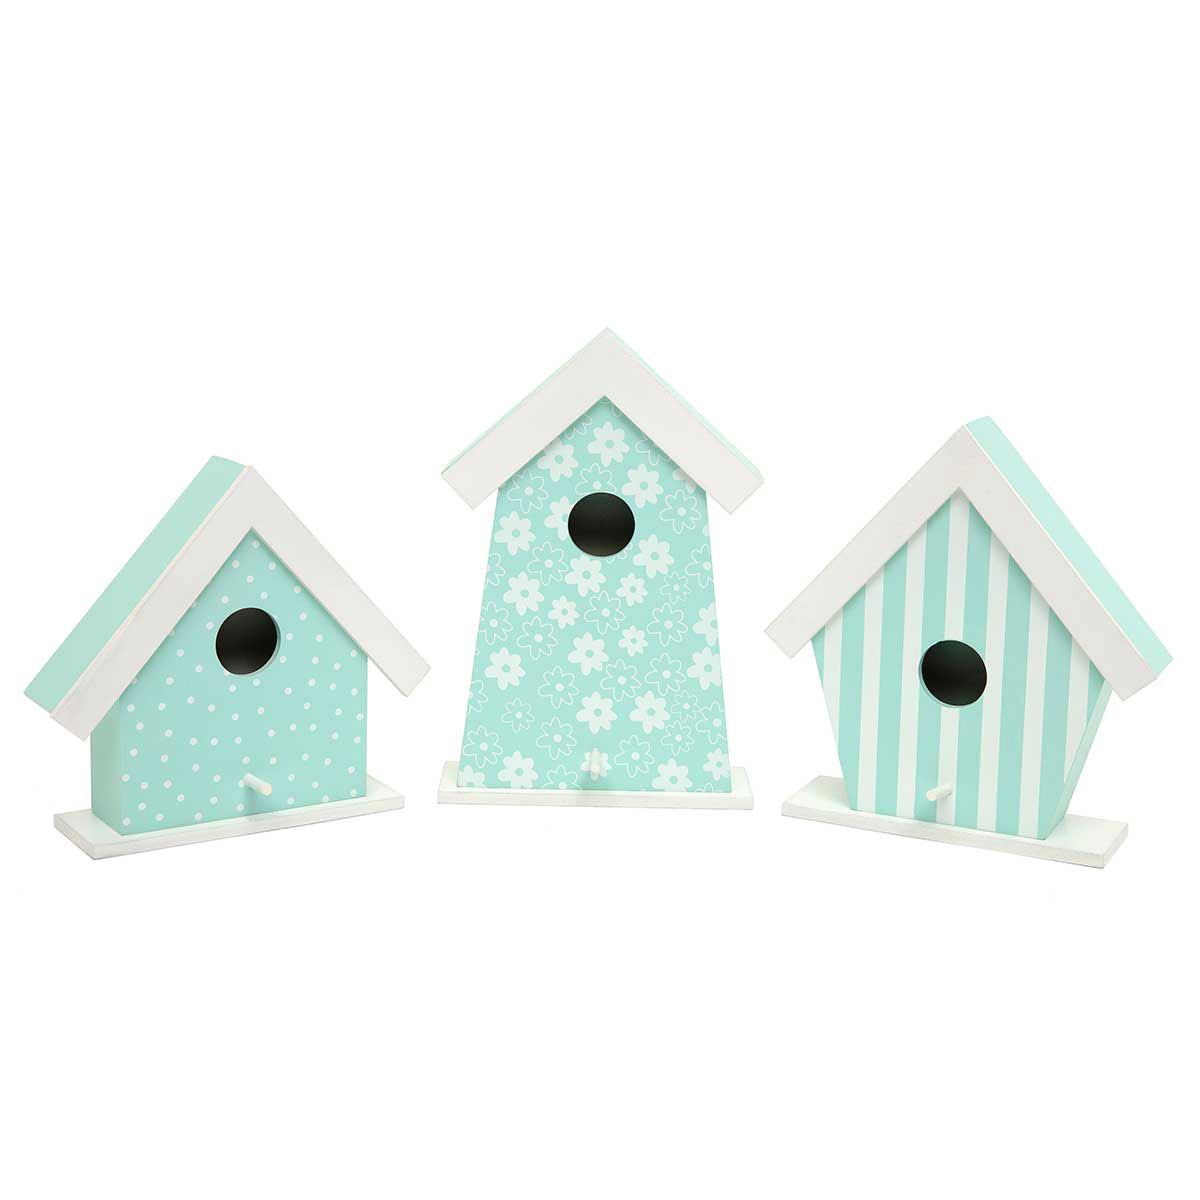 b50 BIRDHOUSE BLUE MEADOW PINDOT 6.75IN X 2.75IN X 6.25IN WOOD - Click Image to Close